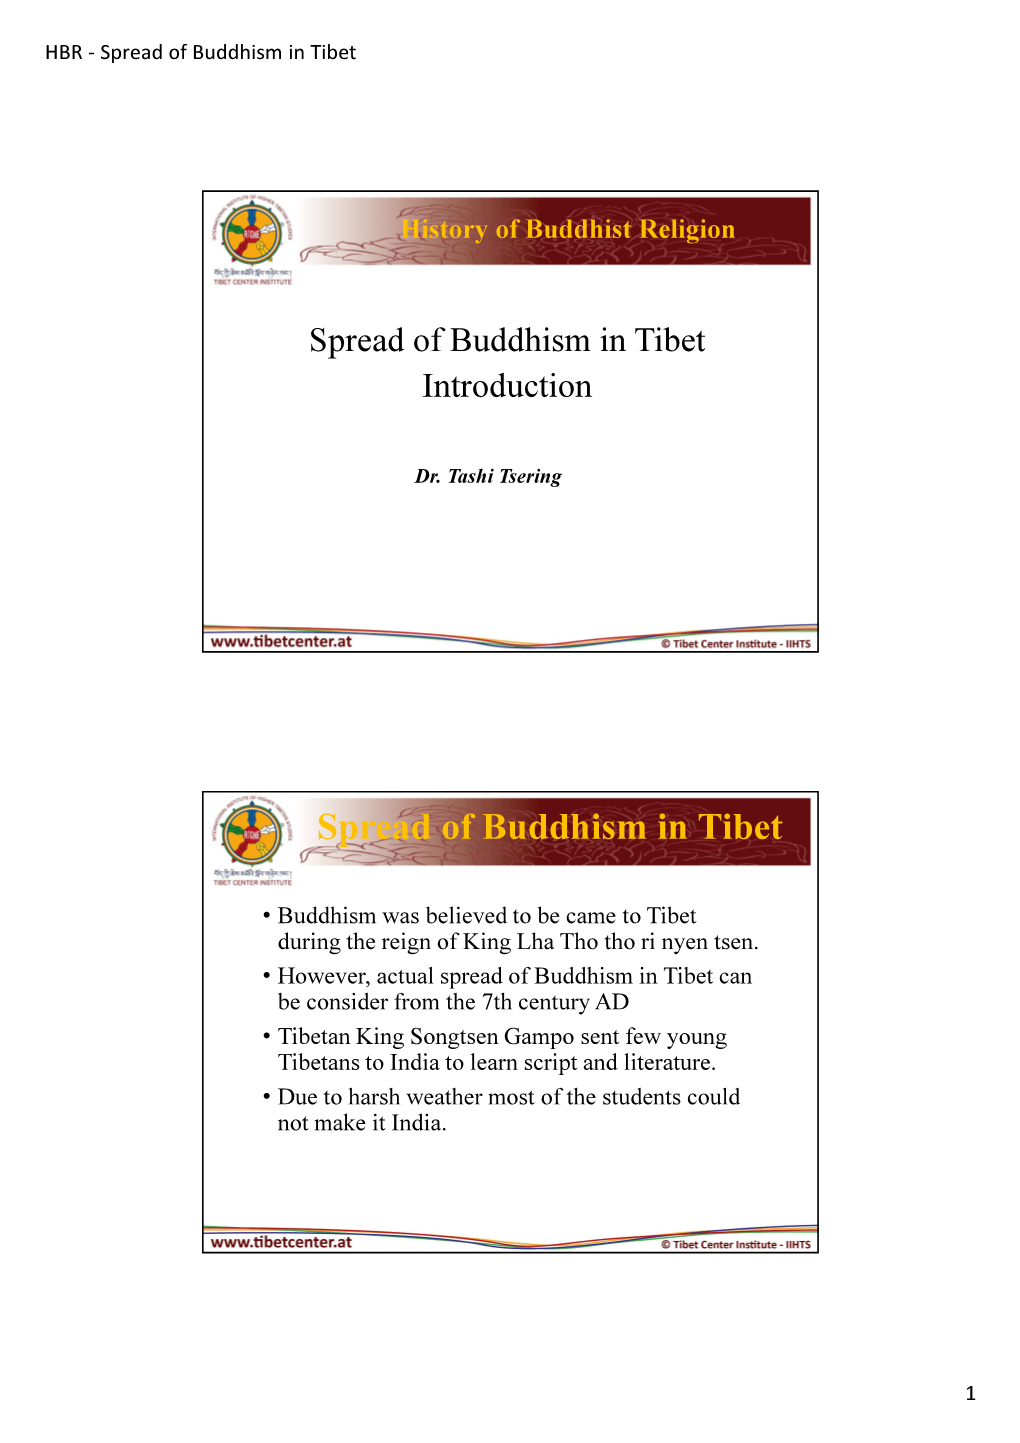 Spread of Buddhism in Tibet